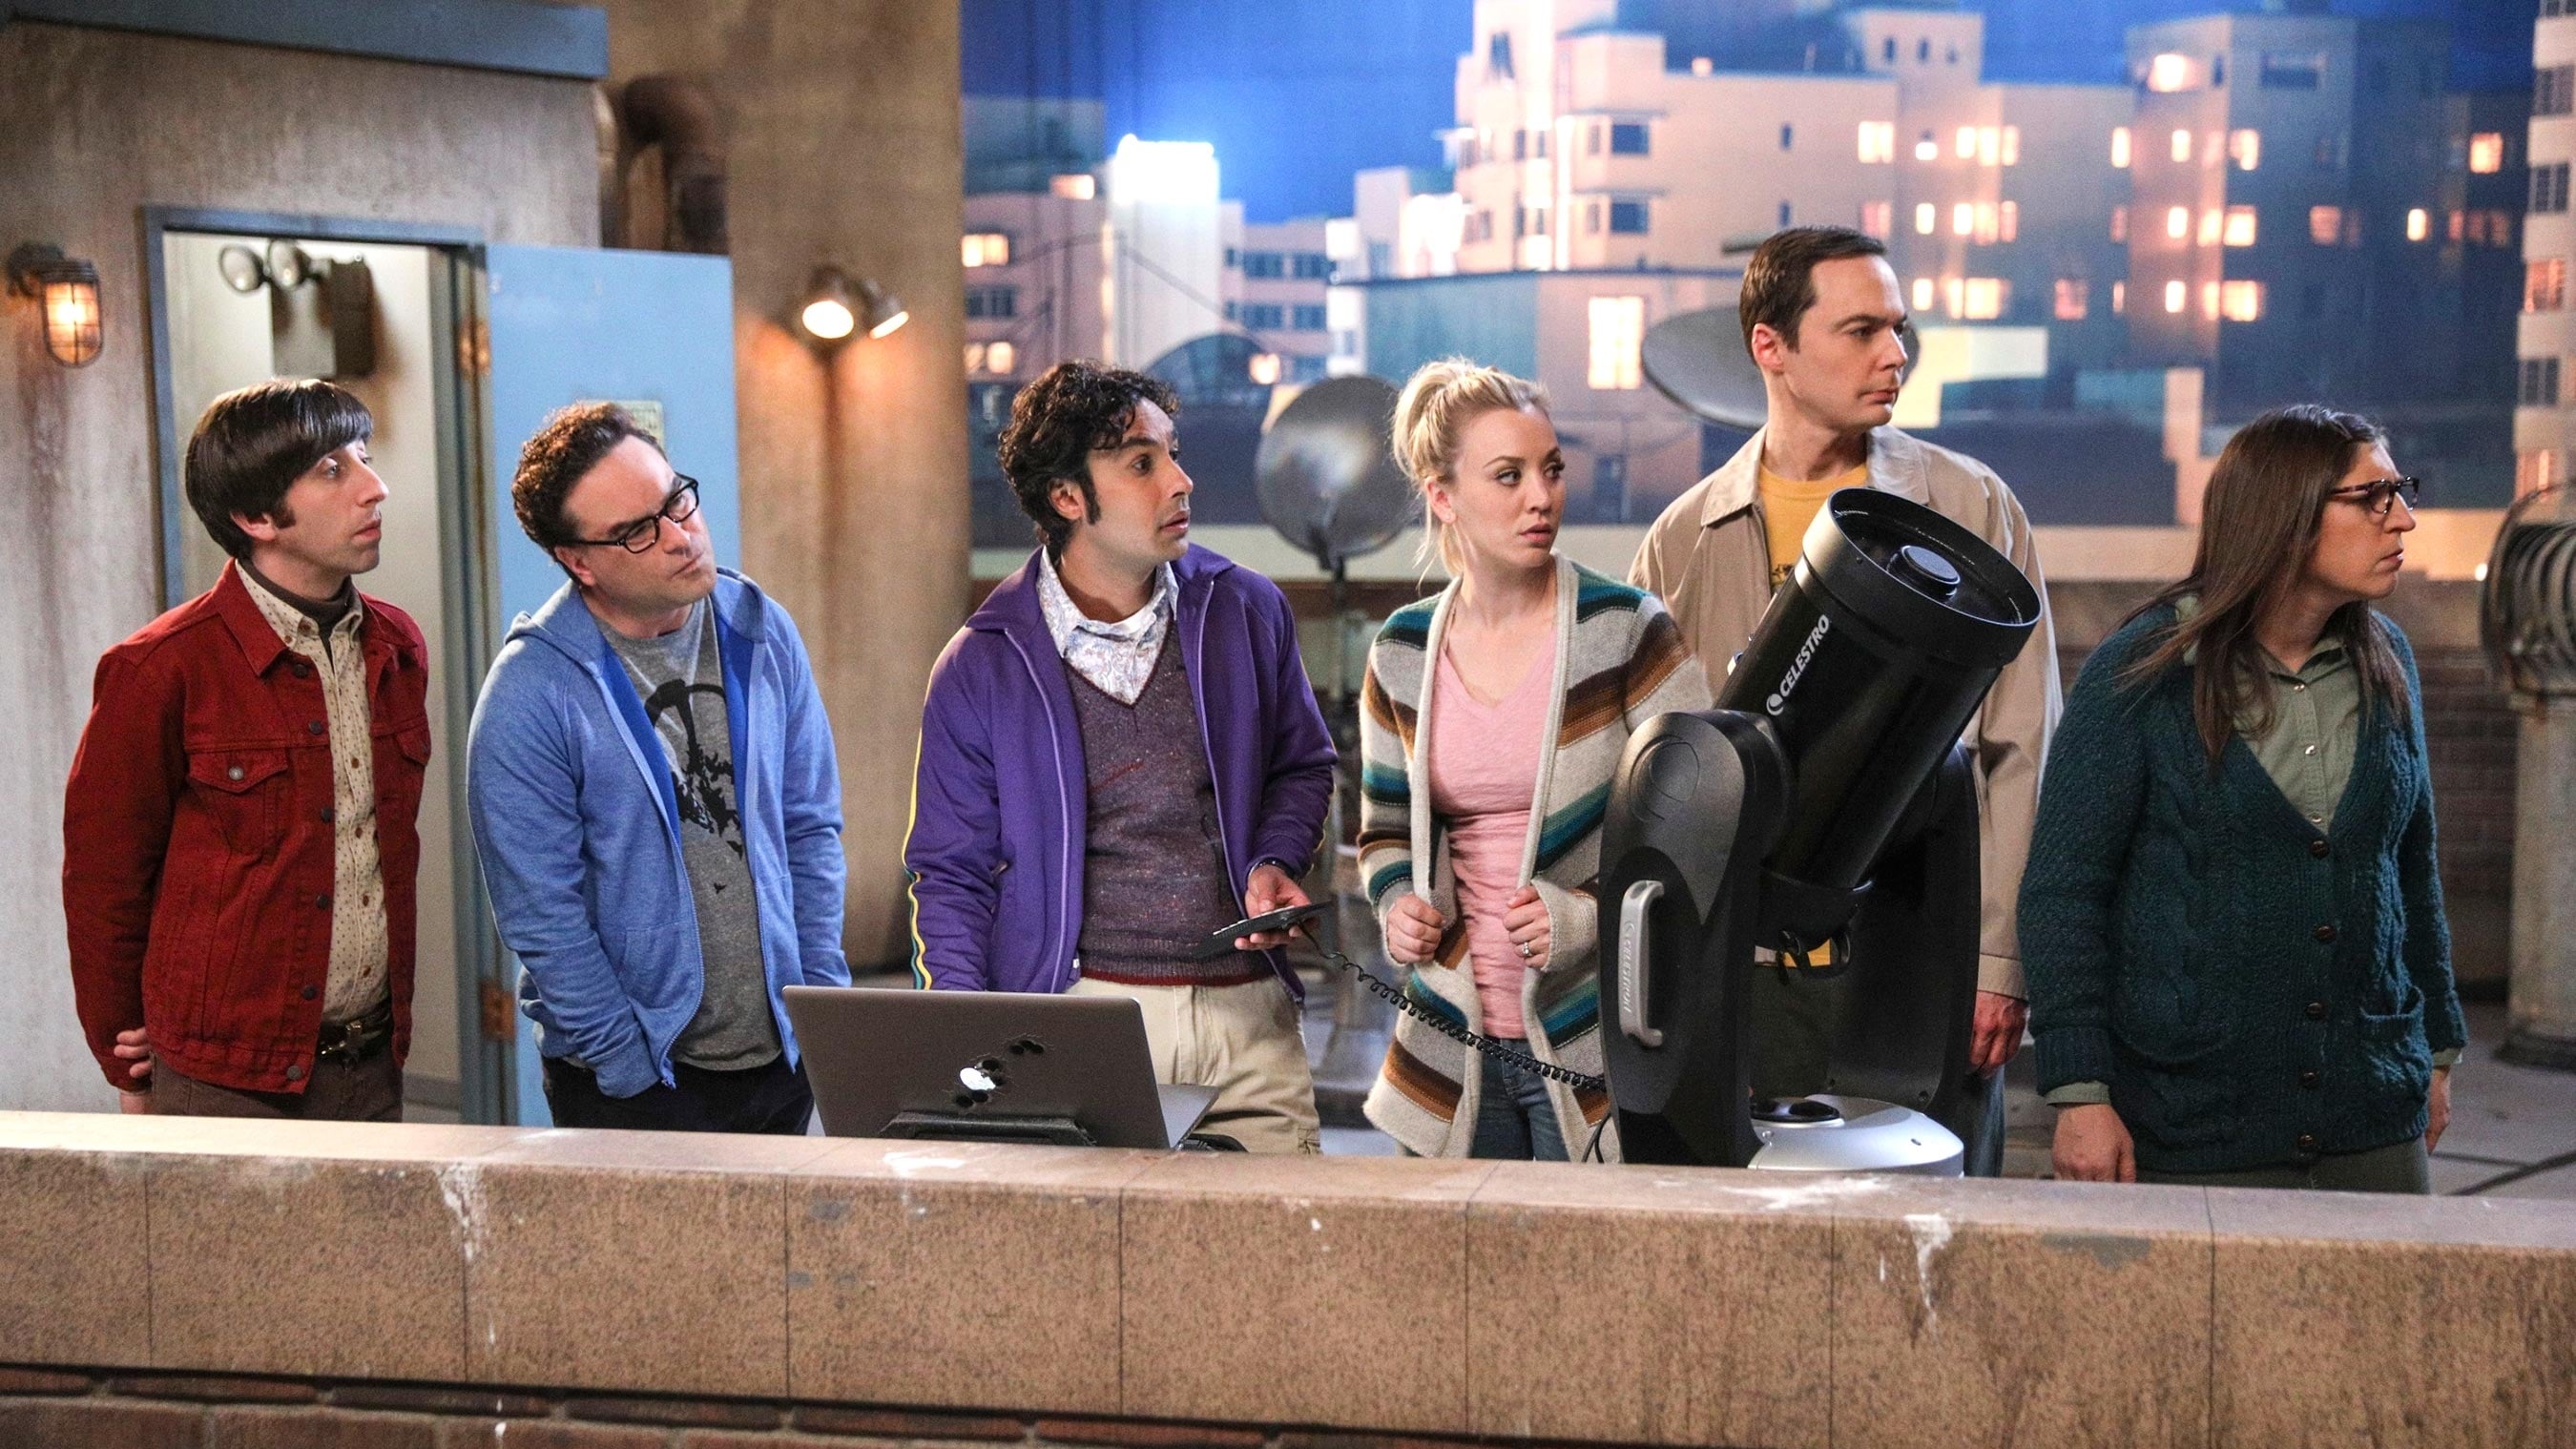 the big bang theory torrent vostfr saison 1 episode